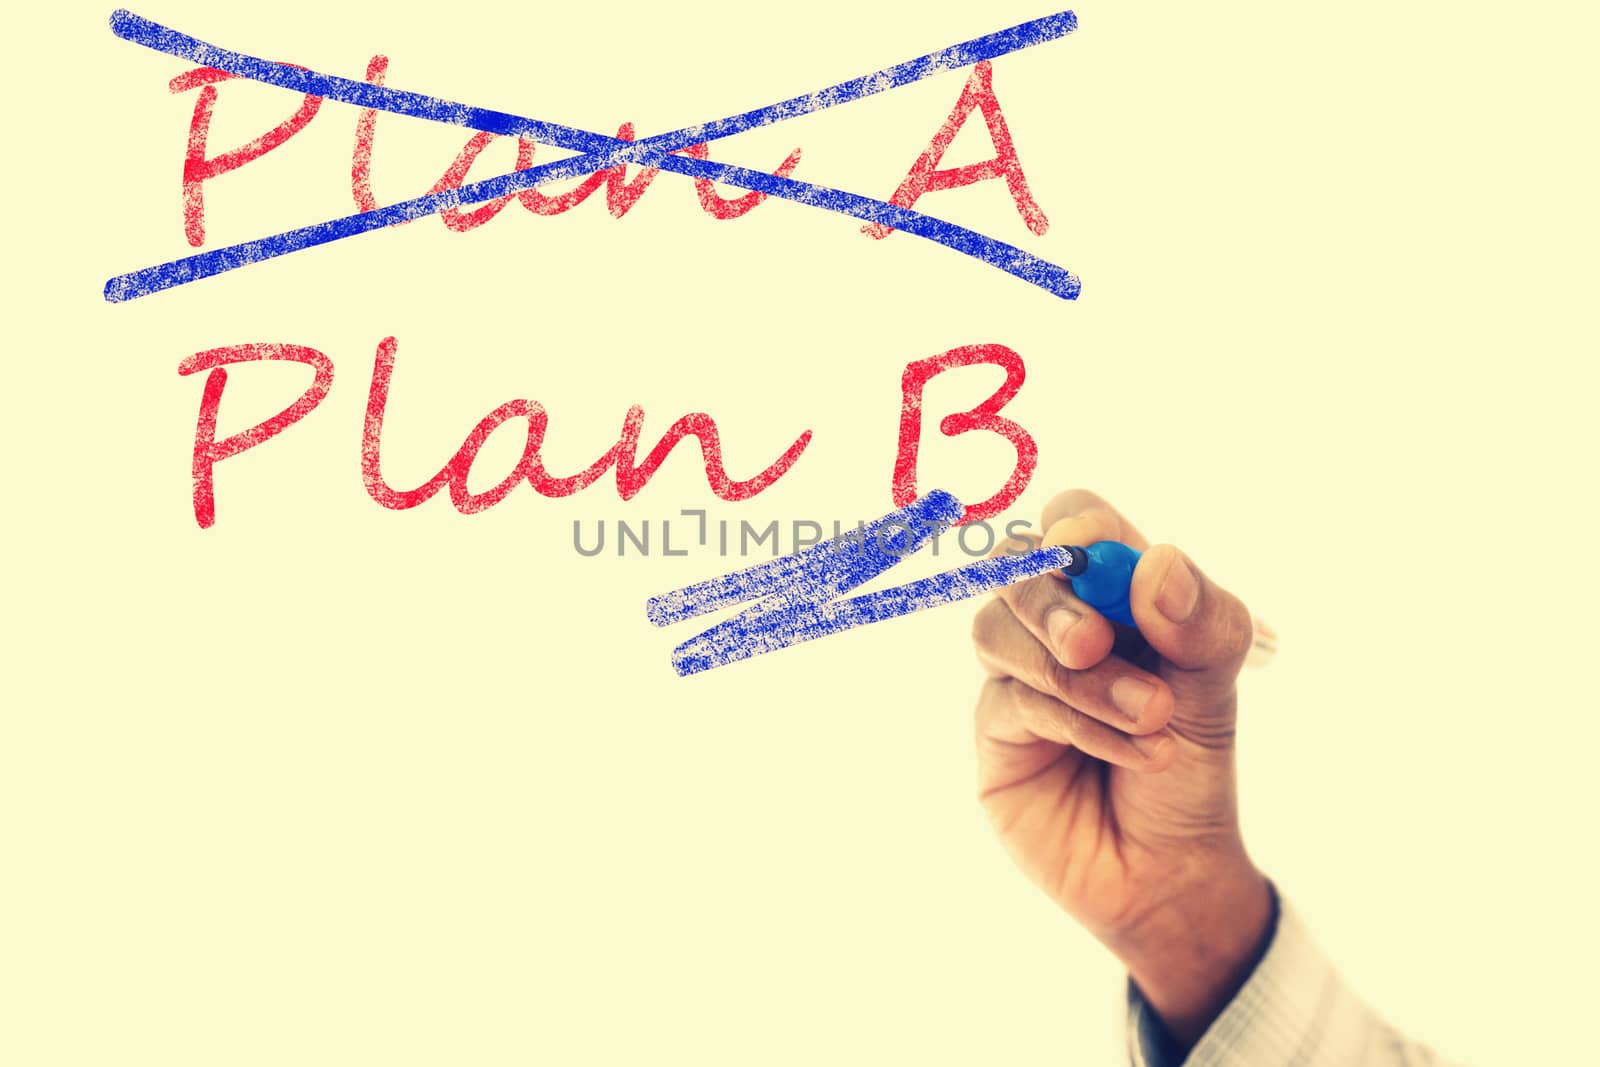 Plan A crossed, Plan B take over by yands